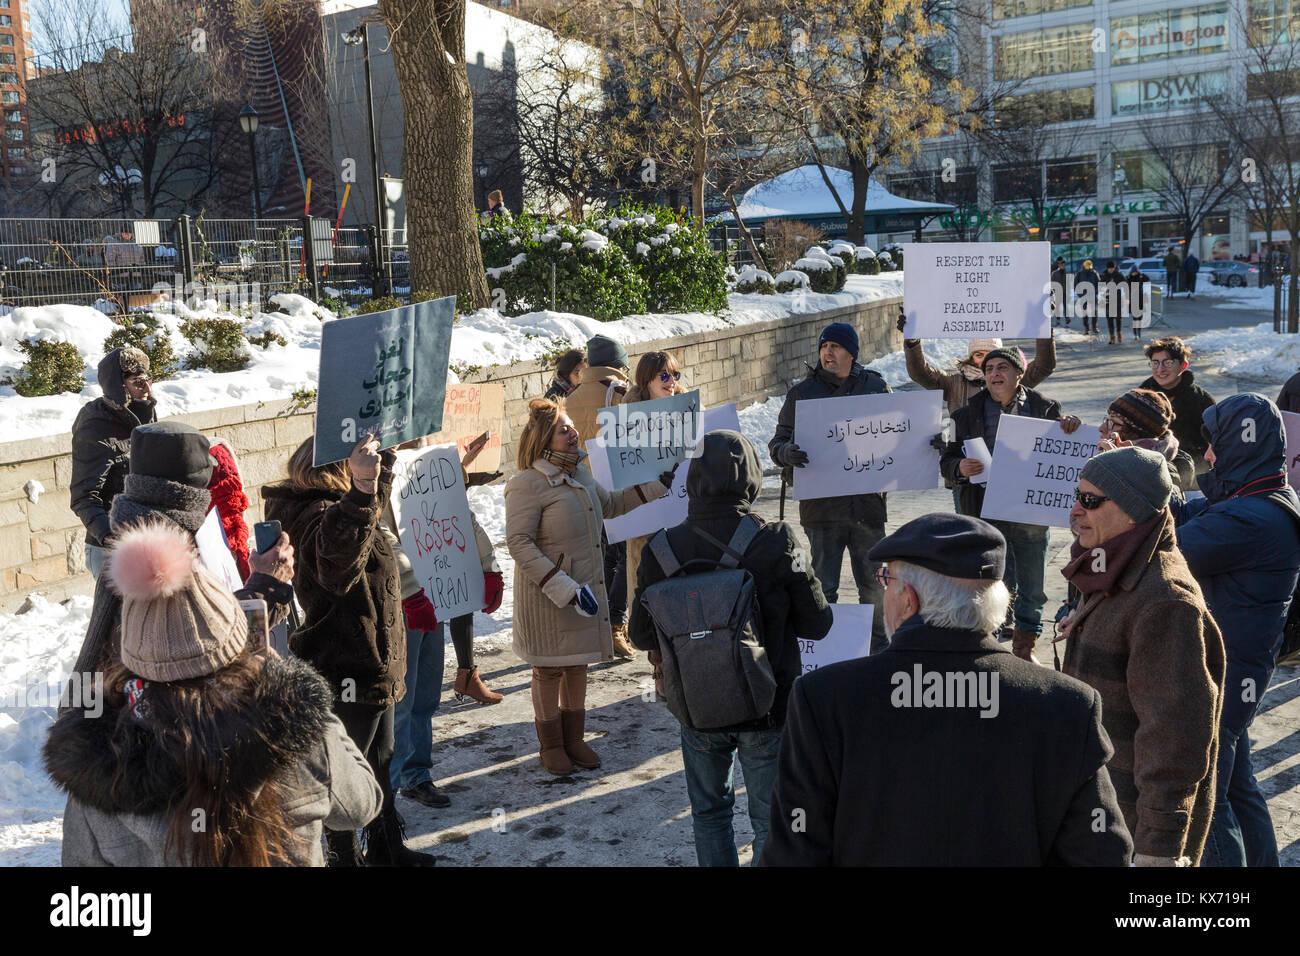 New York, NY - January 7, 2018: About 2 dozen of Iranian Americans and their friends rally to voice support for the Iranian people uprising on Union Square Credit: lev radin/Alamy Live News Stock Photo